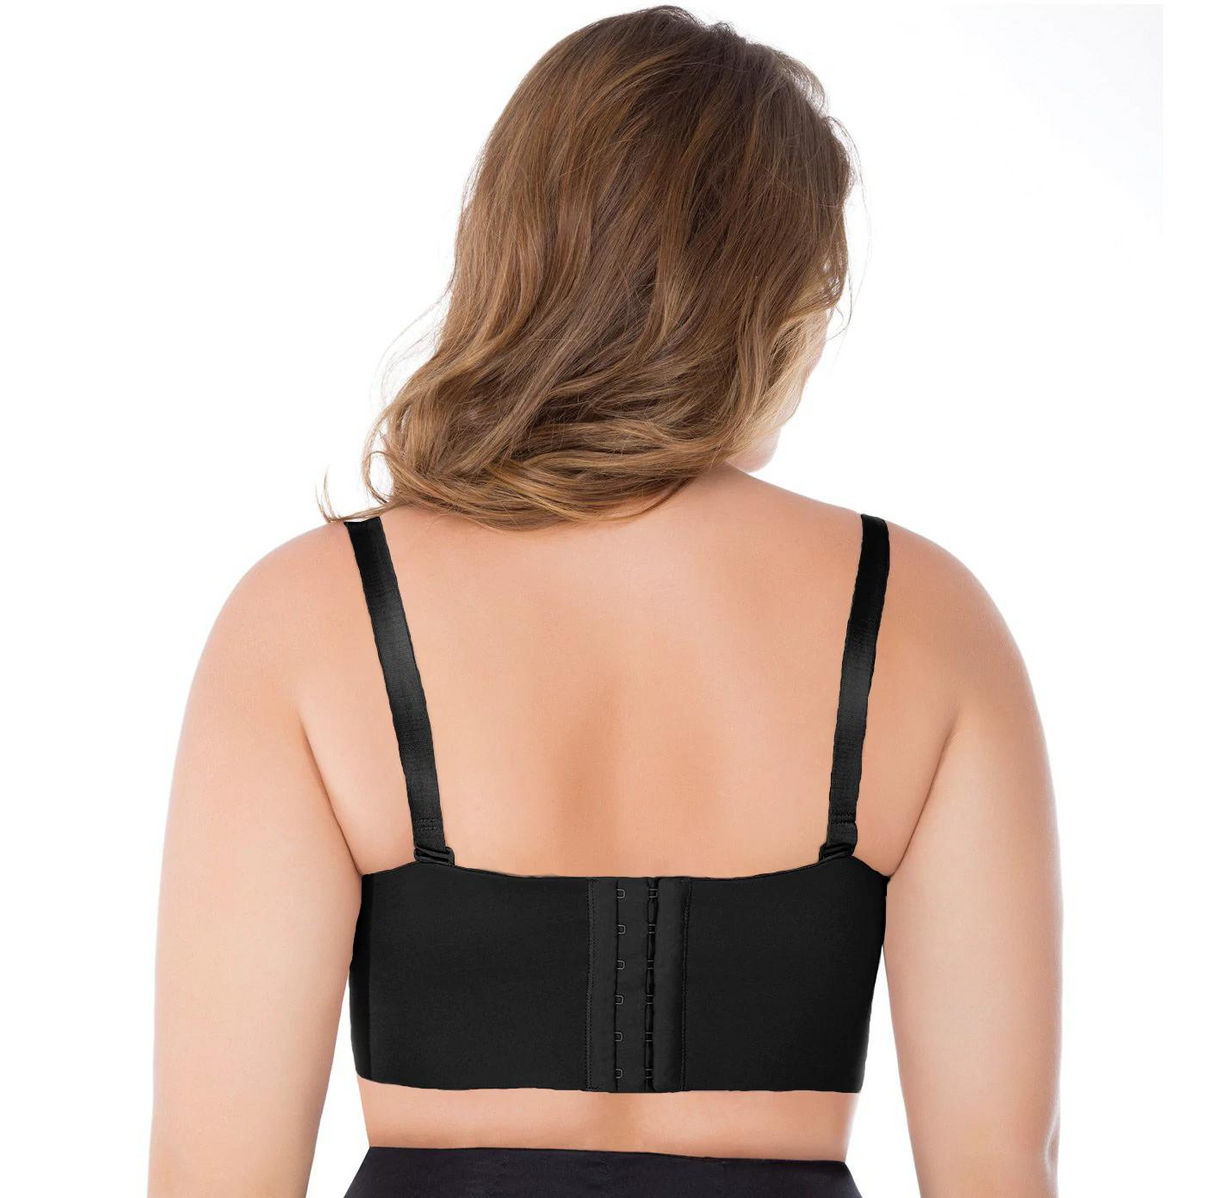 Strapless Push Up Bra  No more fat on the back – Fajas Colombianas Sale